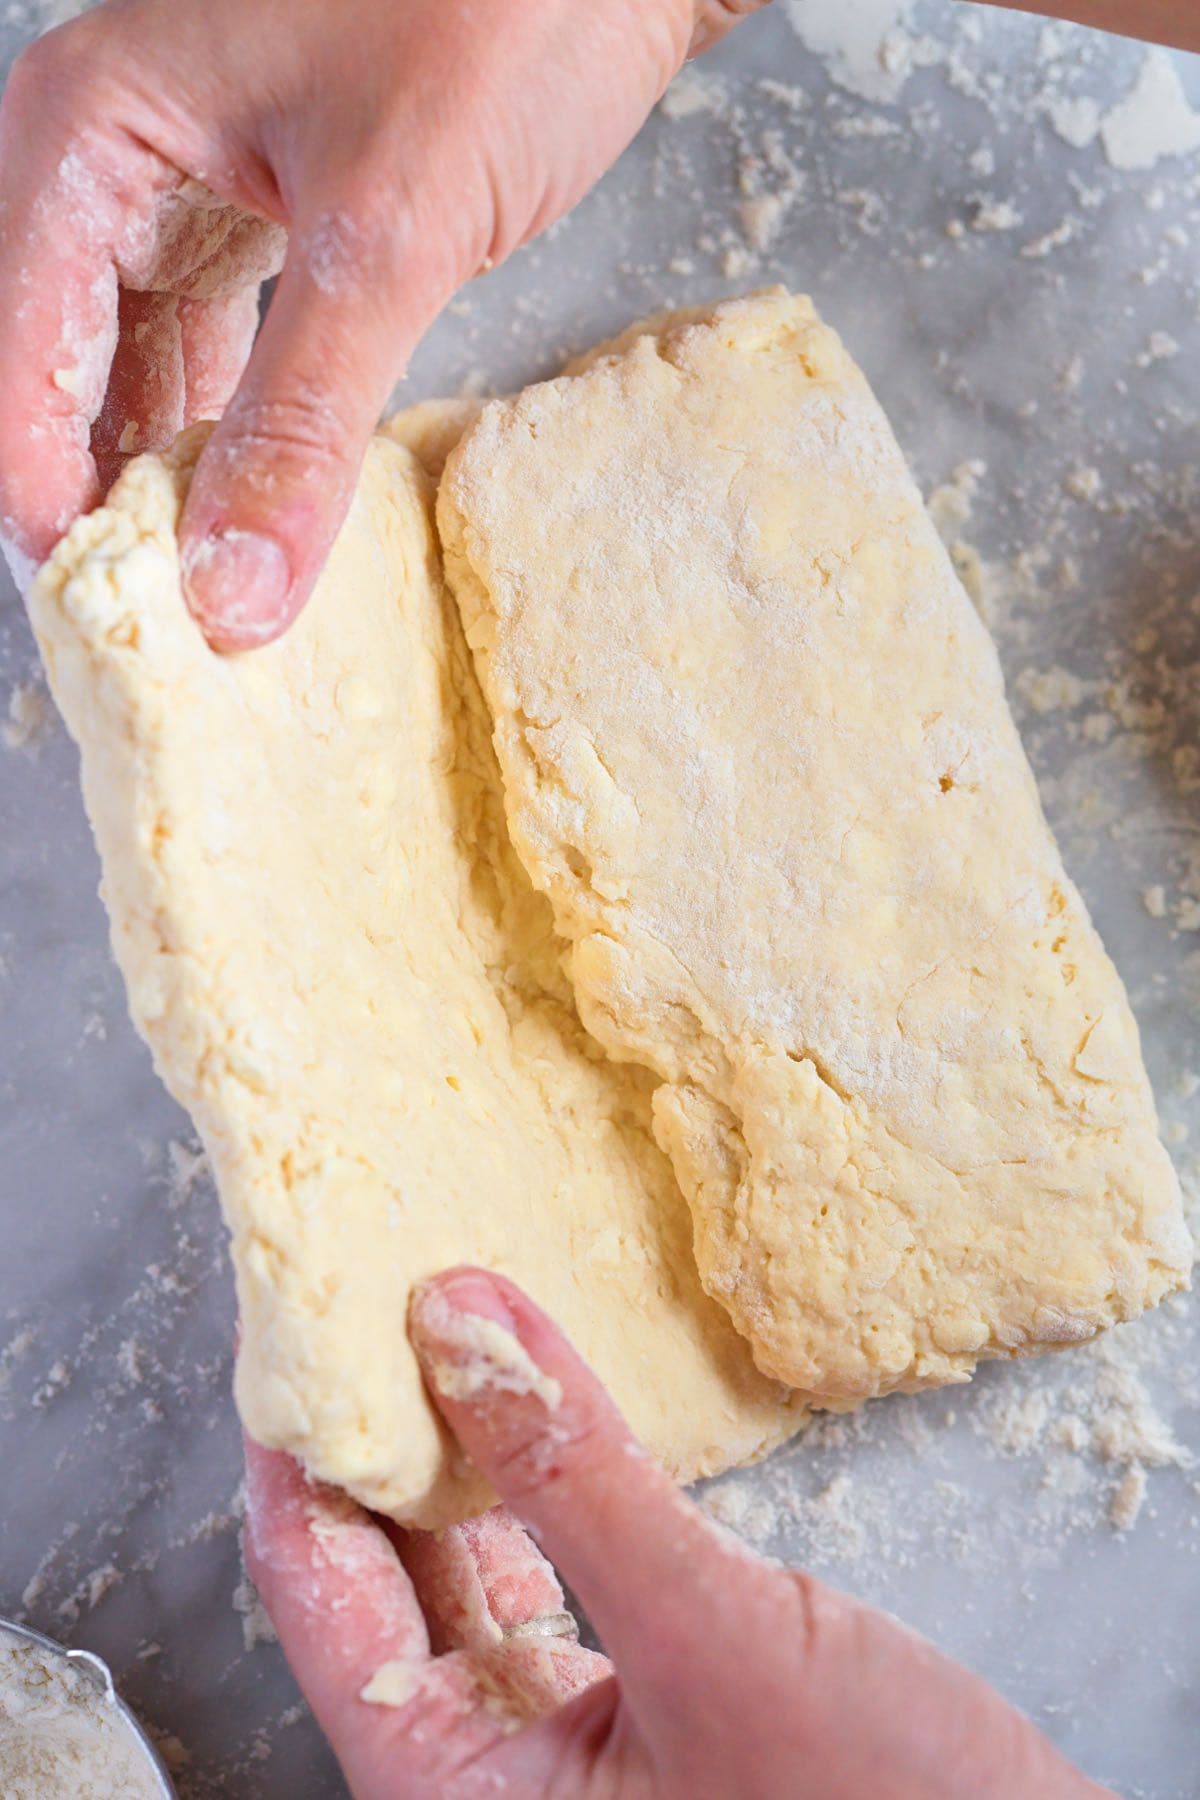 Folding the biscuit dough